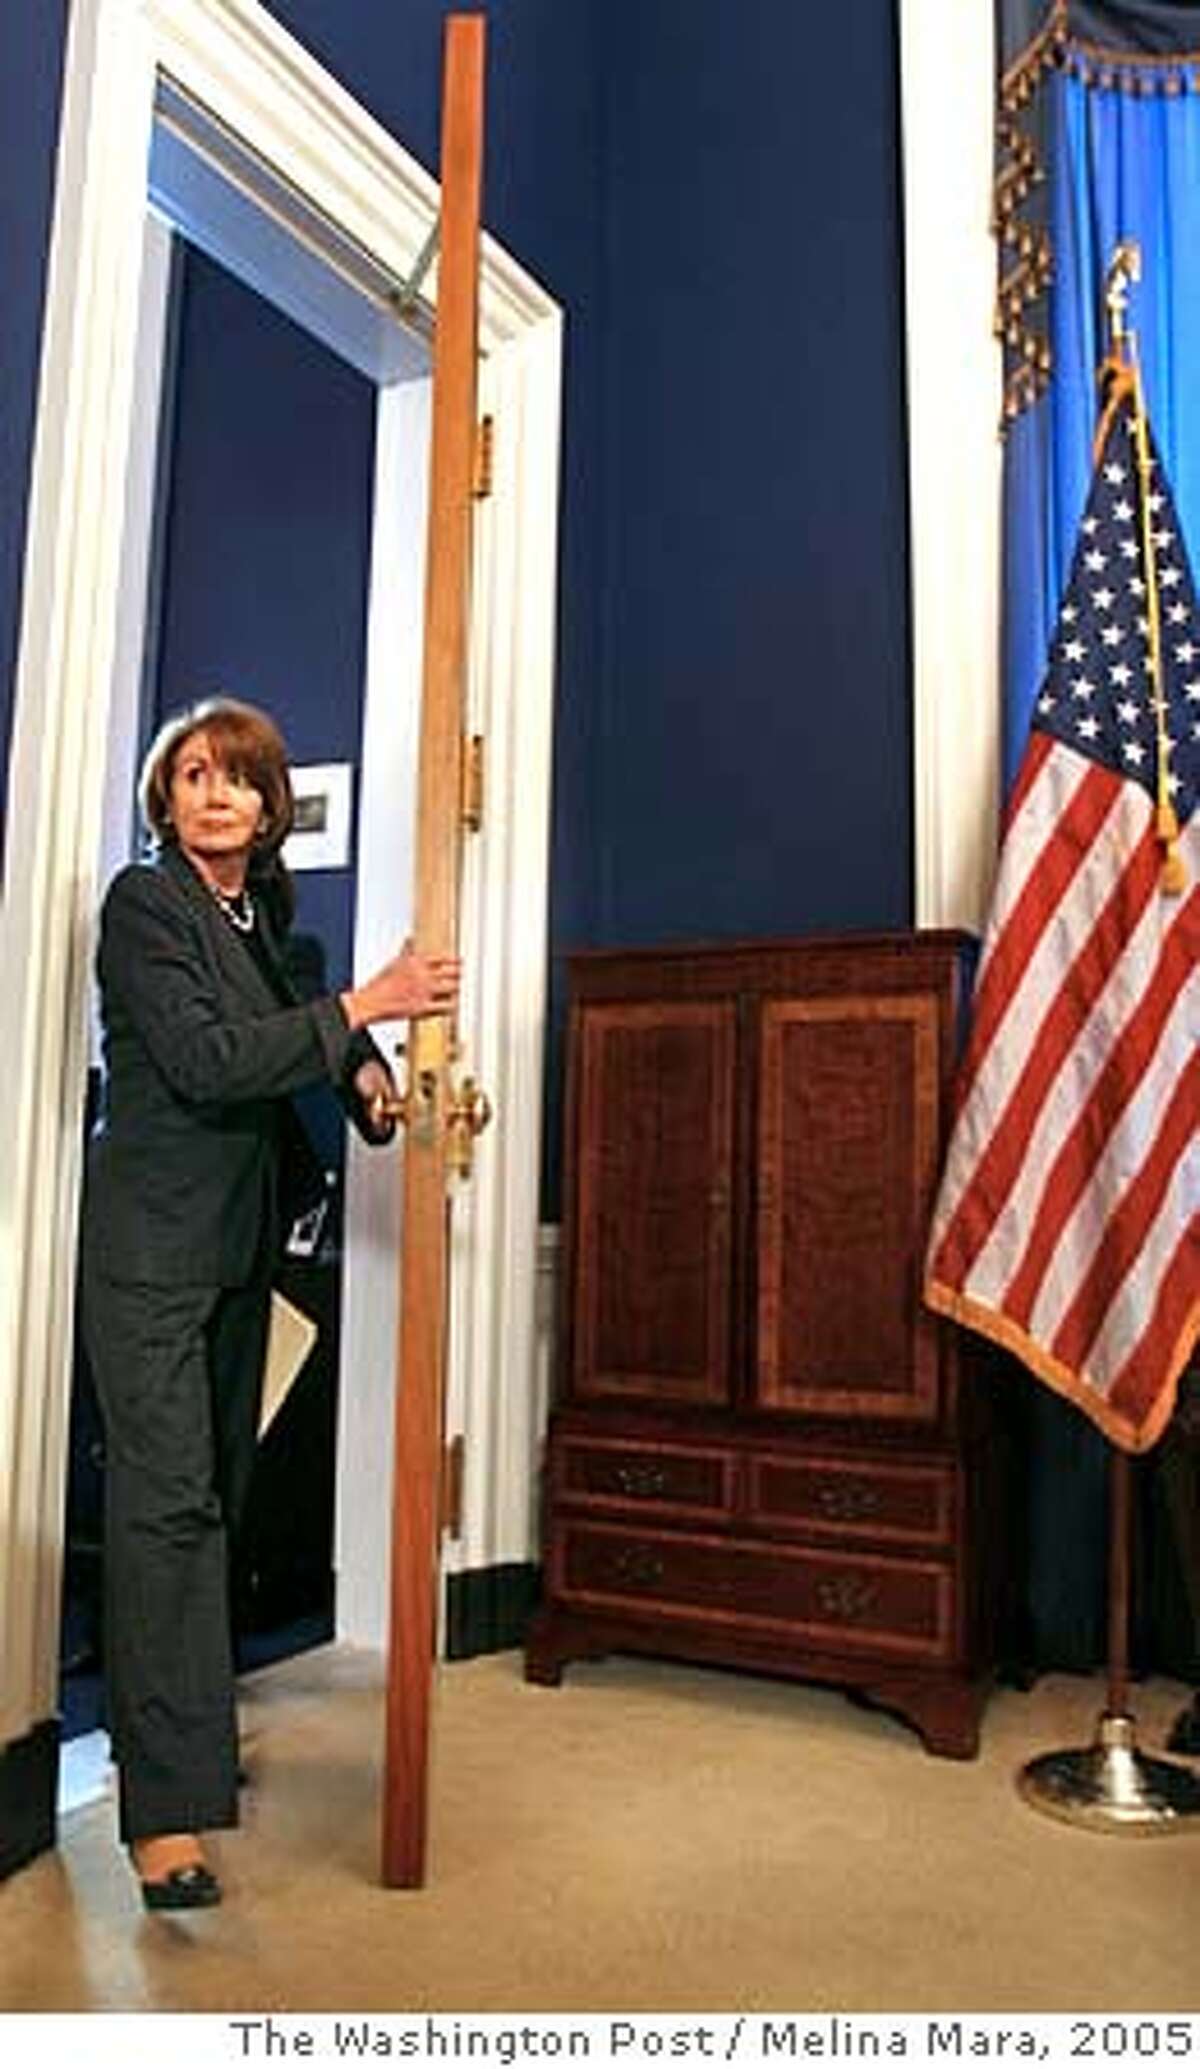 NA/PELOSI LOCATION: WASHINGTON, DC DATE: 12/08/05 NEG: CAPTION: House Minority Leader Nancy Pelosi (D-CA) enters her office before a weekly press conference on Capitol Hill Thursday December 08, 2005. photo by Melina Mara/The Washington Post.